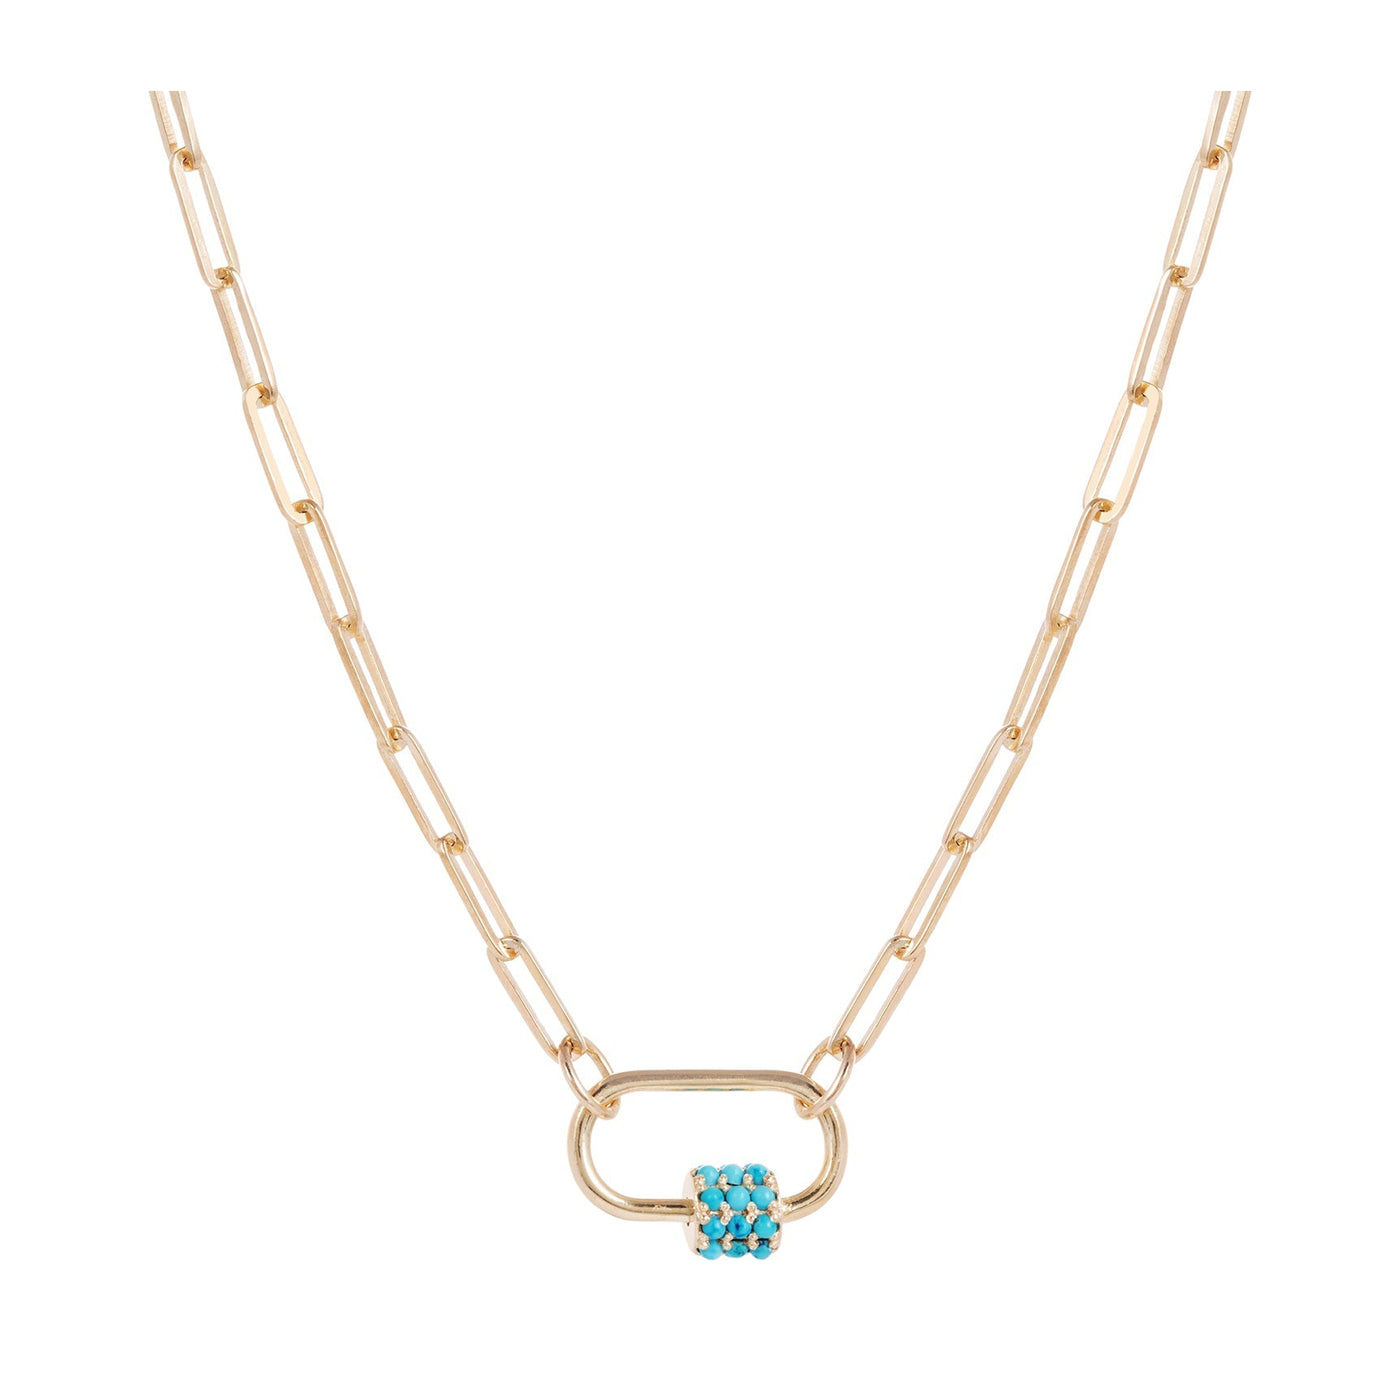 Daphne Gold Paperclip Link Chain Necklace with Turquoise Carabiner lock